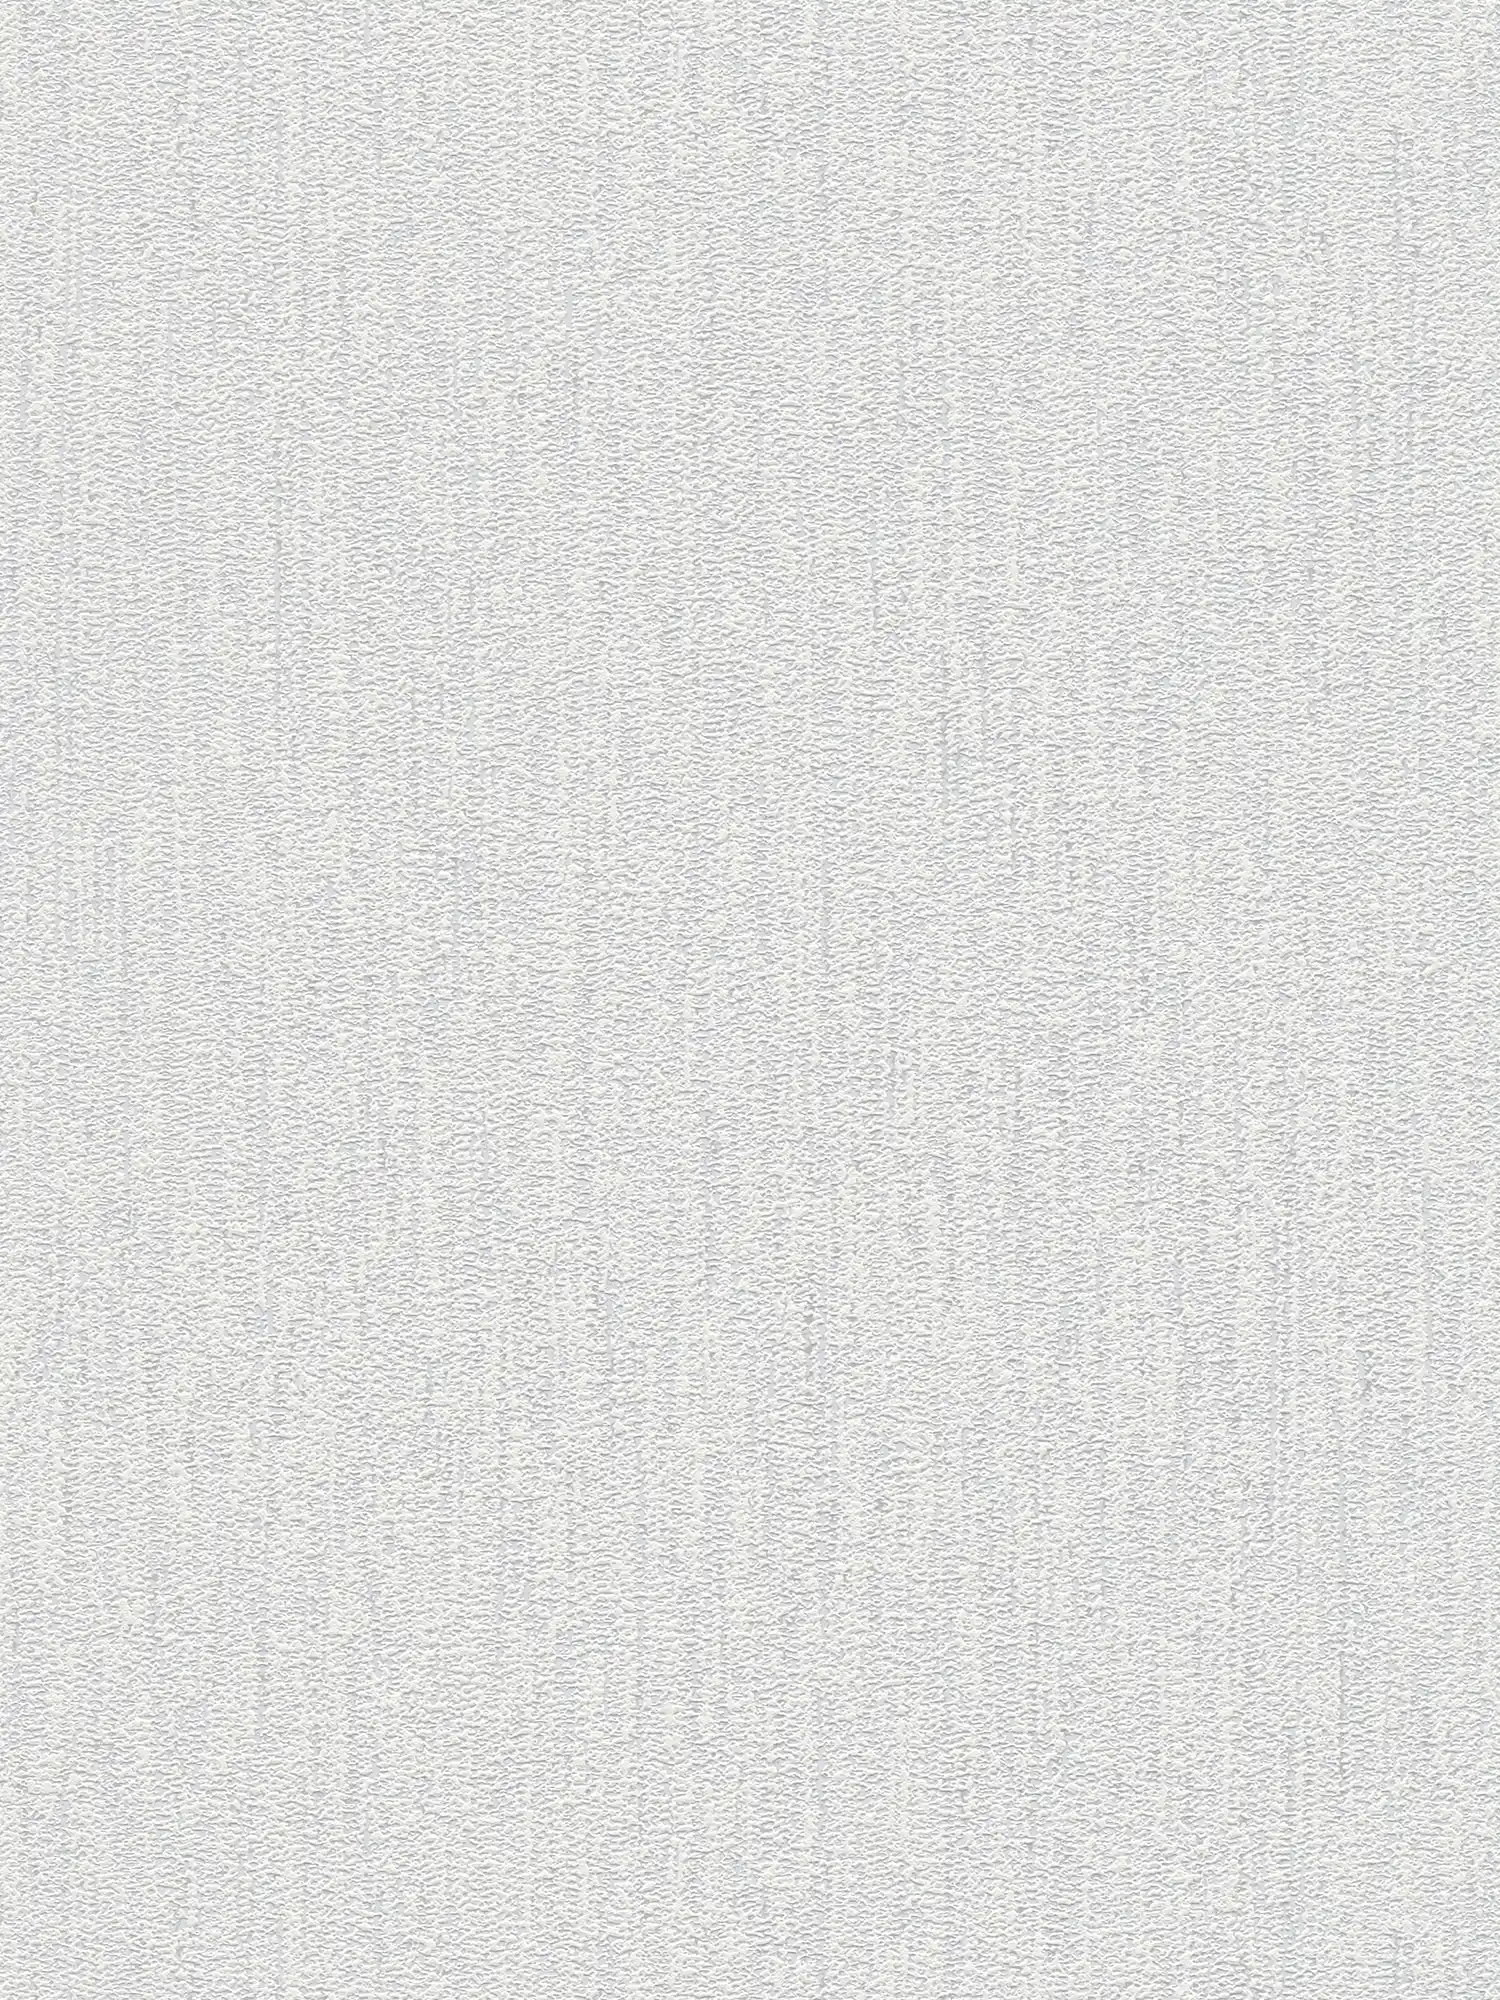             Plain wallpaper with fabric structure - white, light grey
        